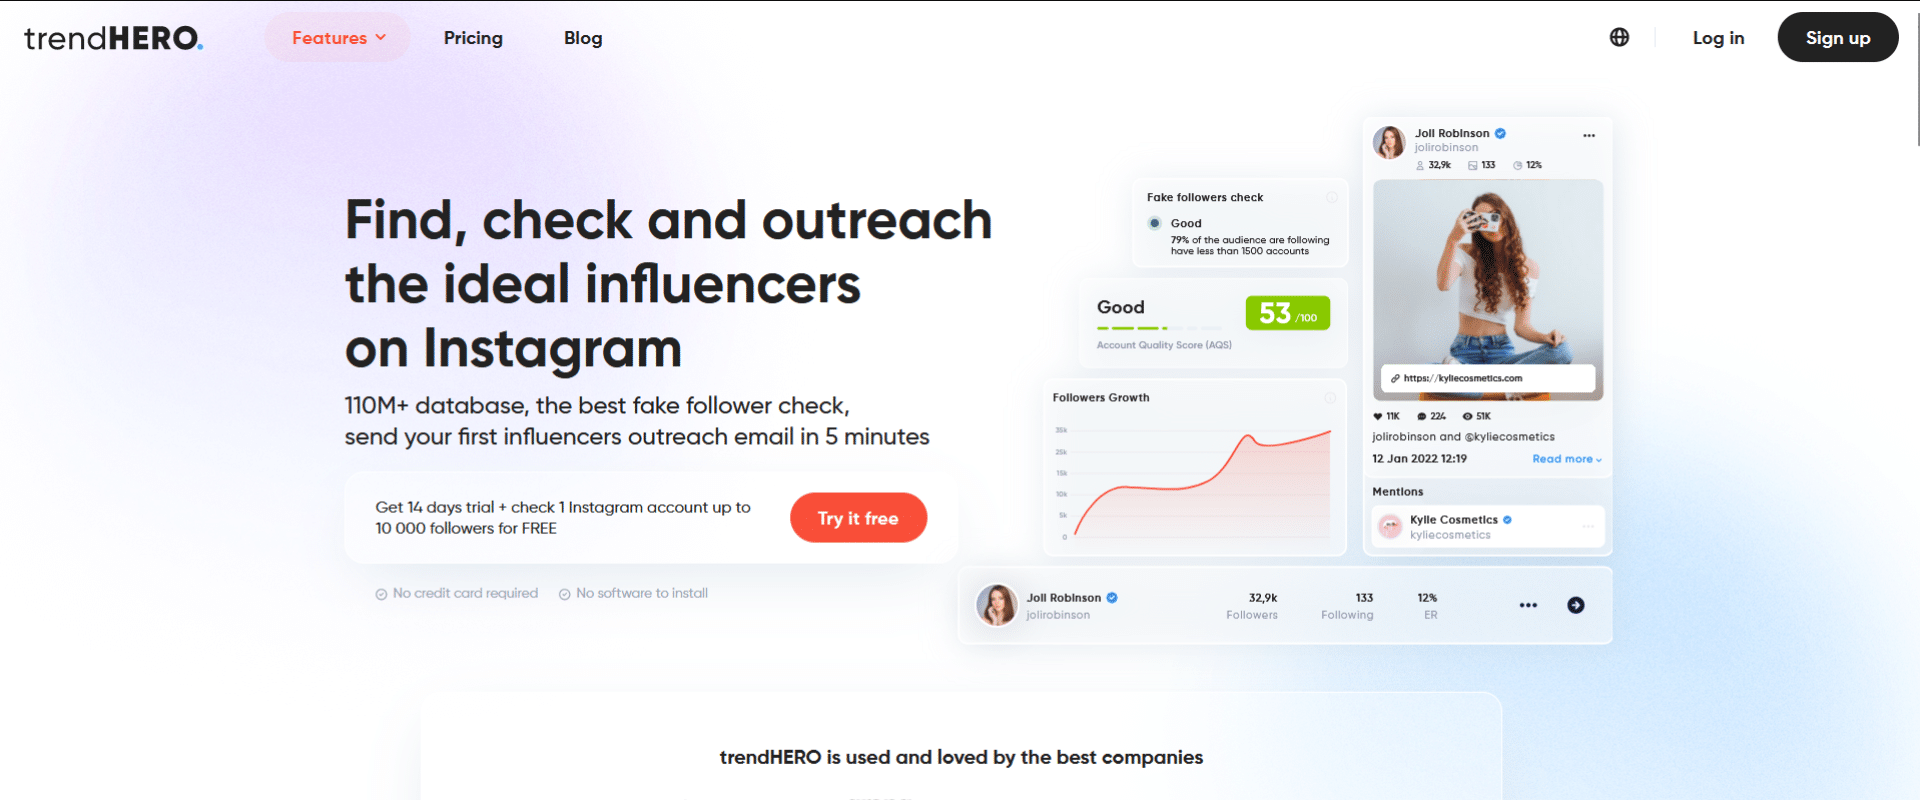 TrendHERO Review: An instagram page with the words instagram influencers.